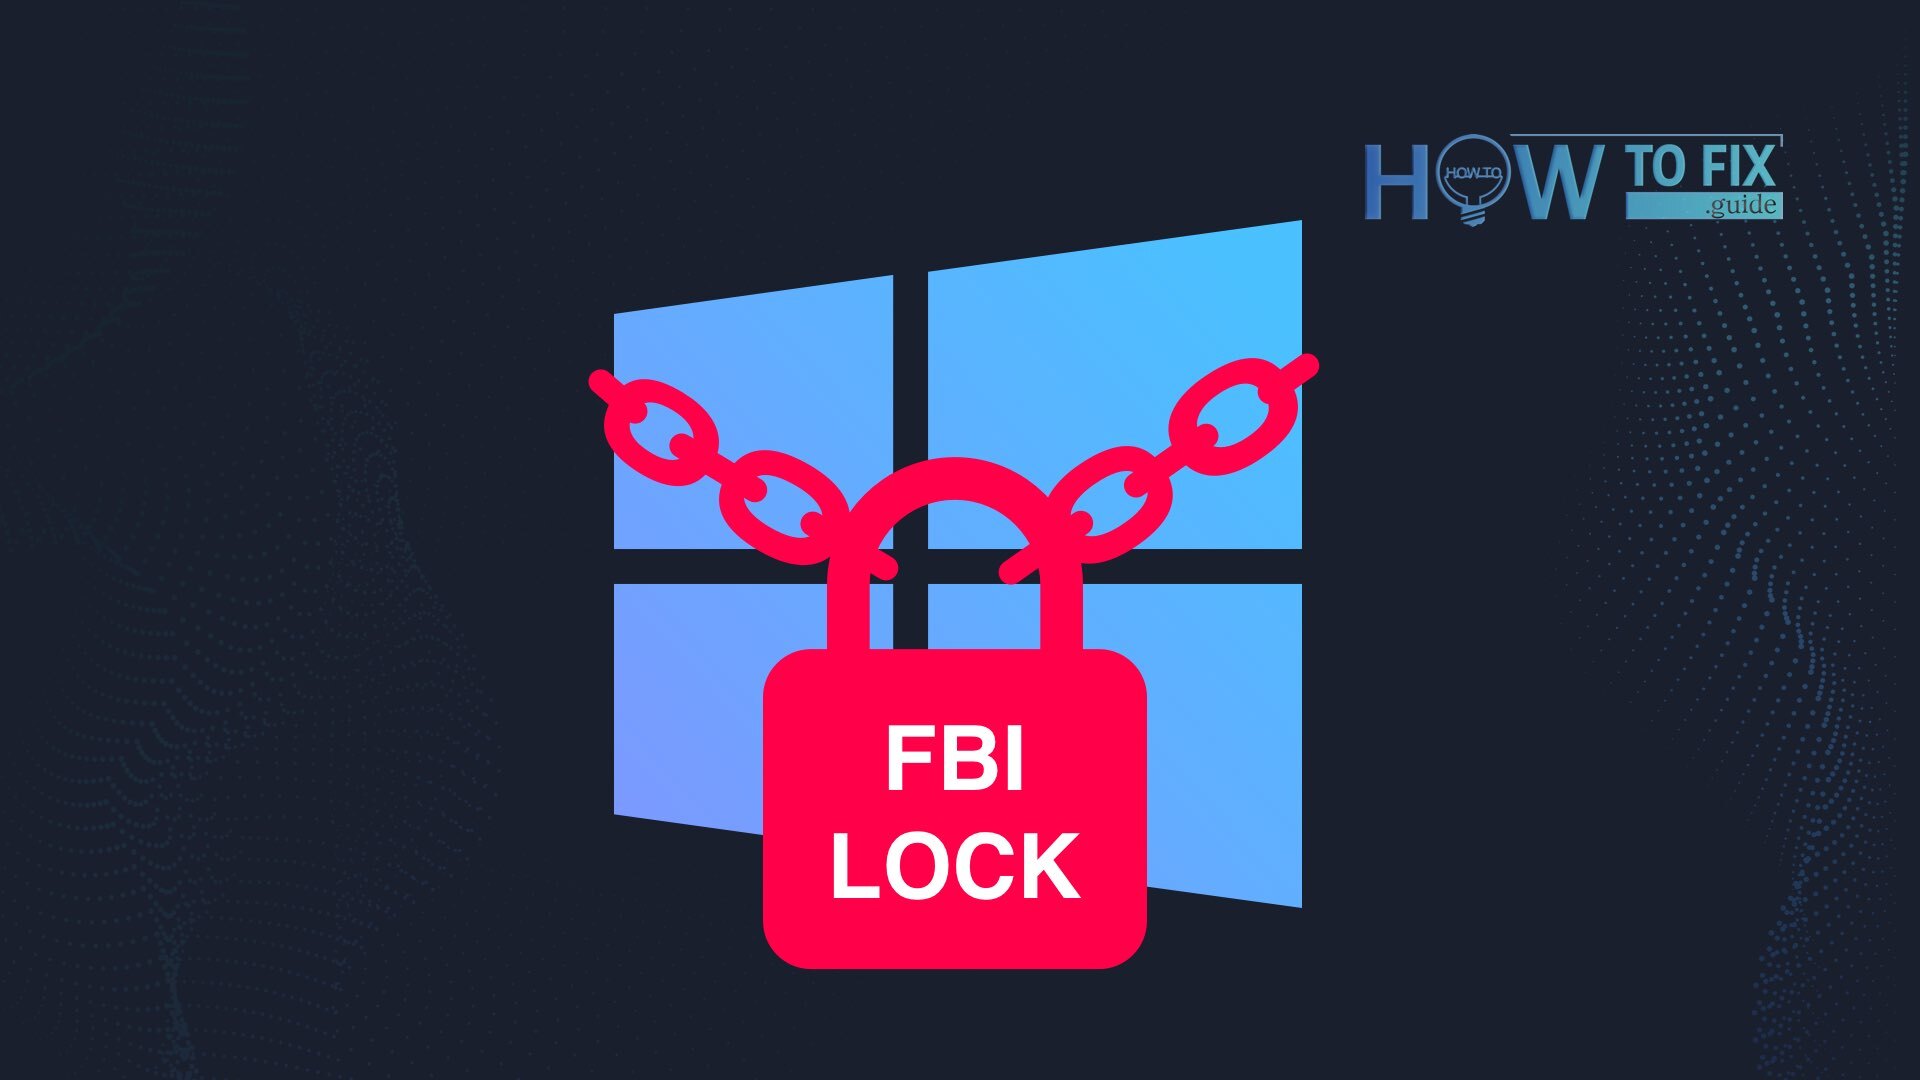 Remove FBI Lock malware from your computer